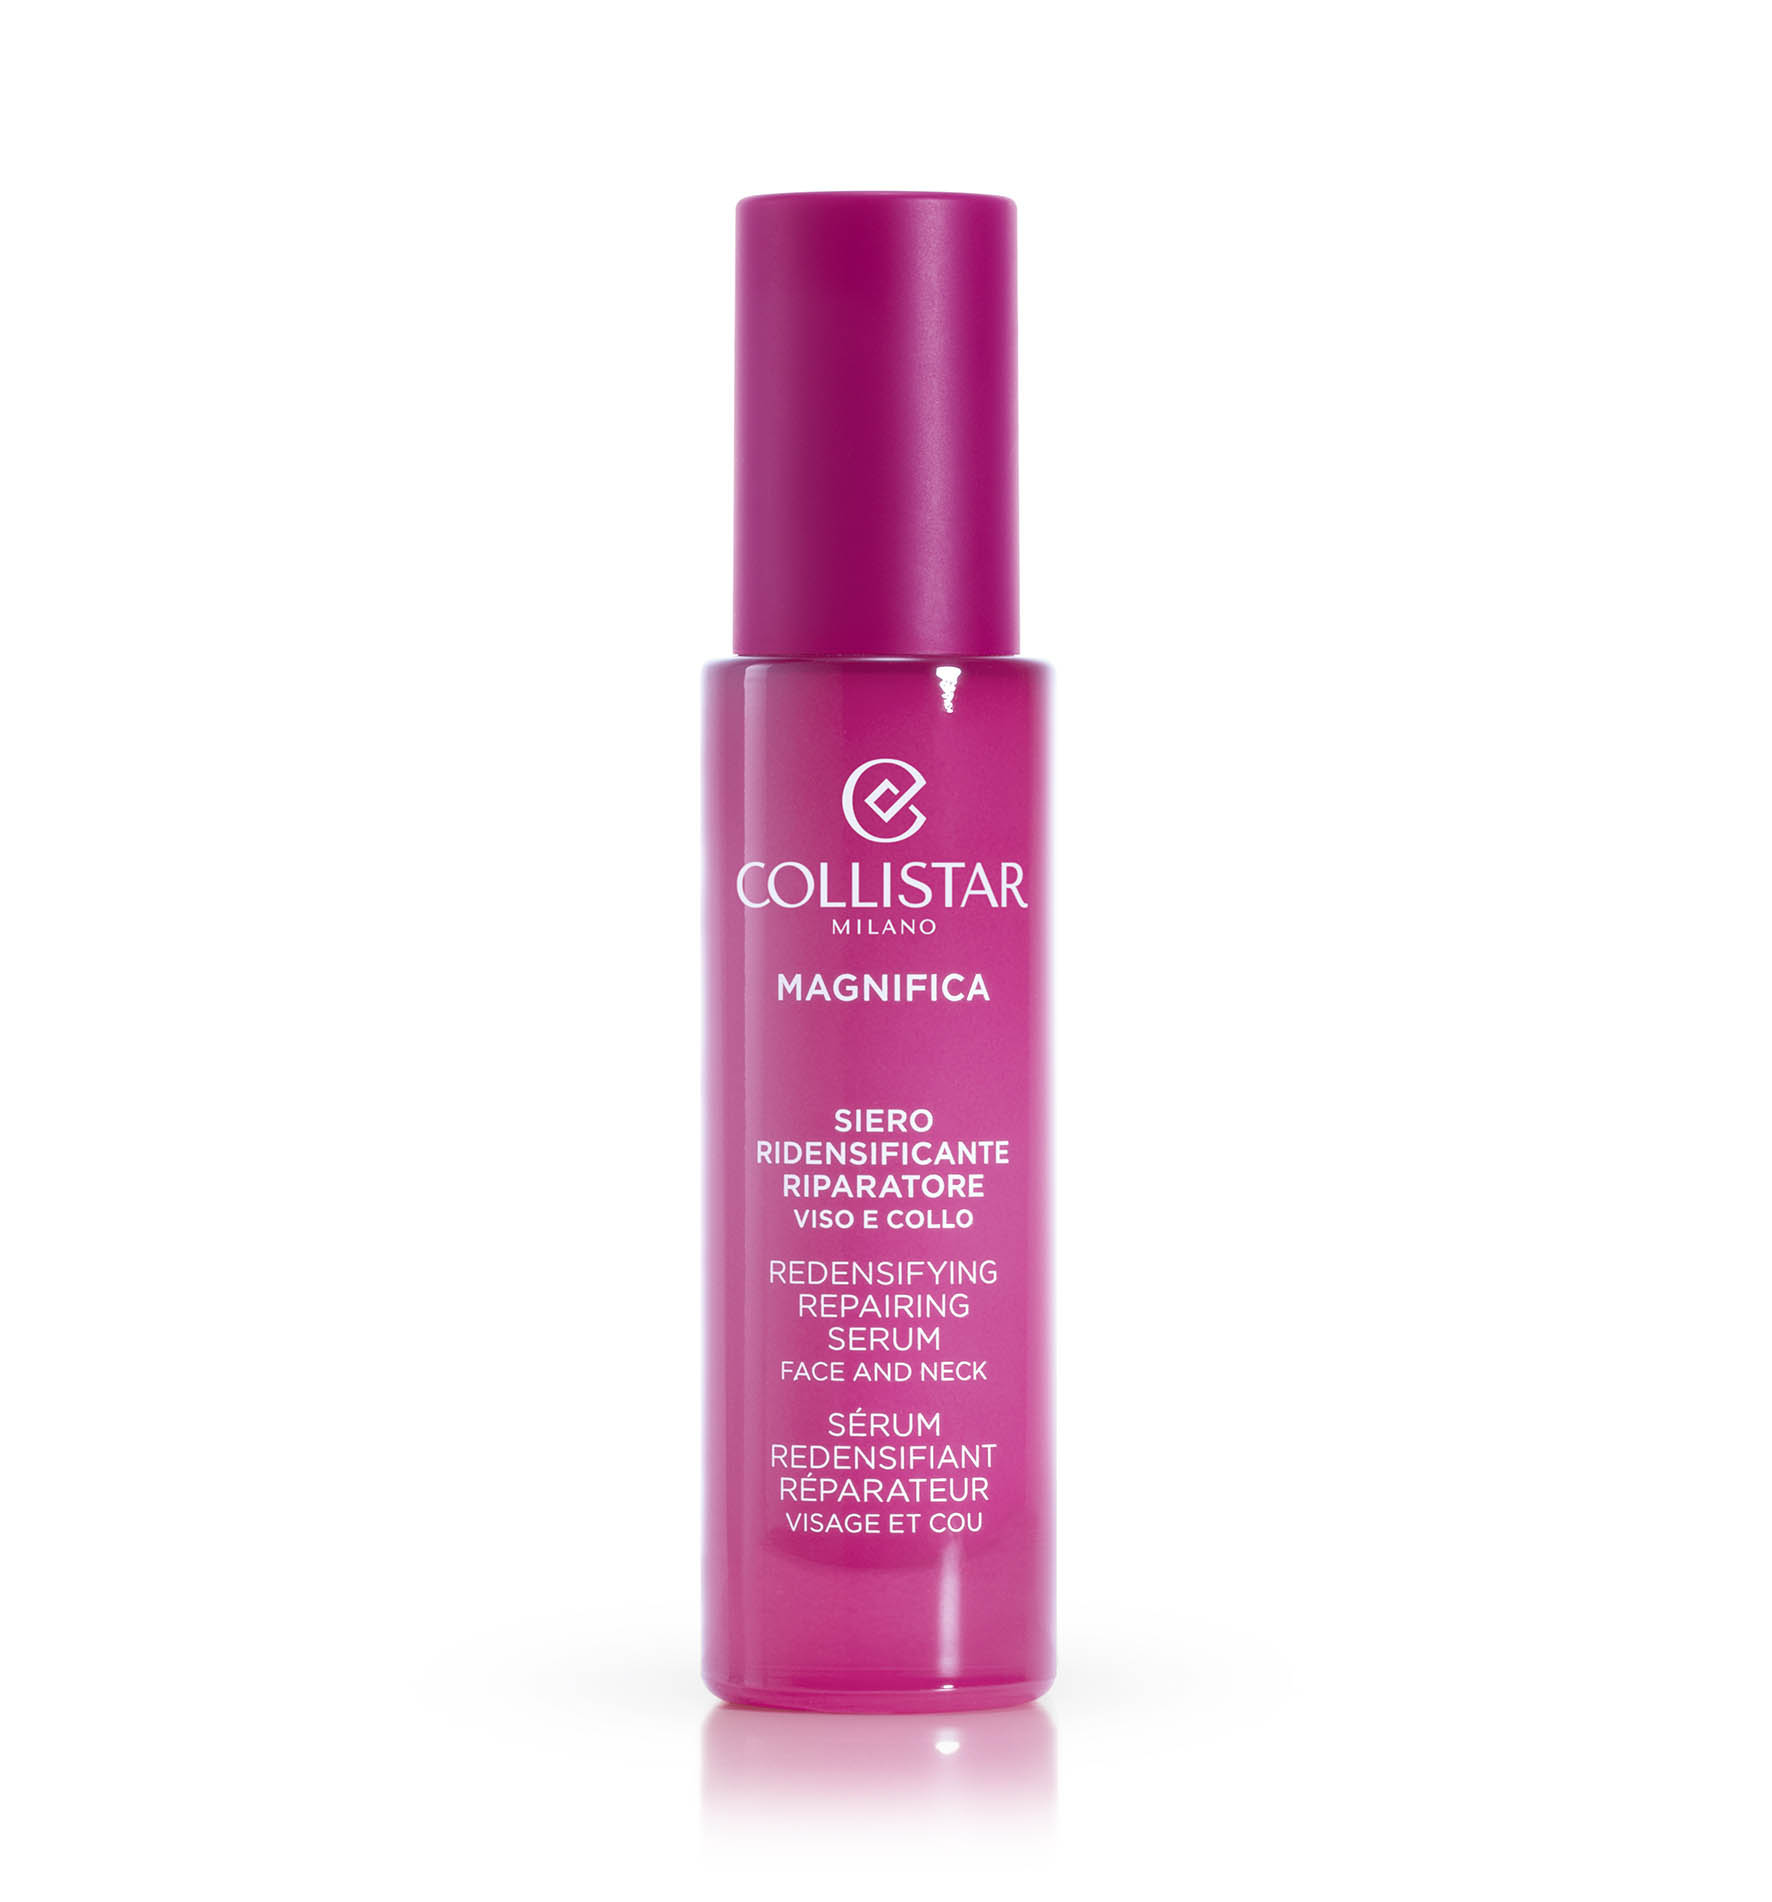 MAGNIFICA REPLUMPING REGENERATING FACE AND NECK SERUM - Magnifica | Collistar - Shop Online Ufficiale